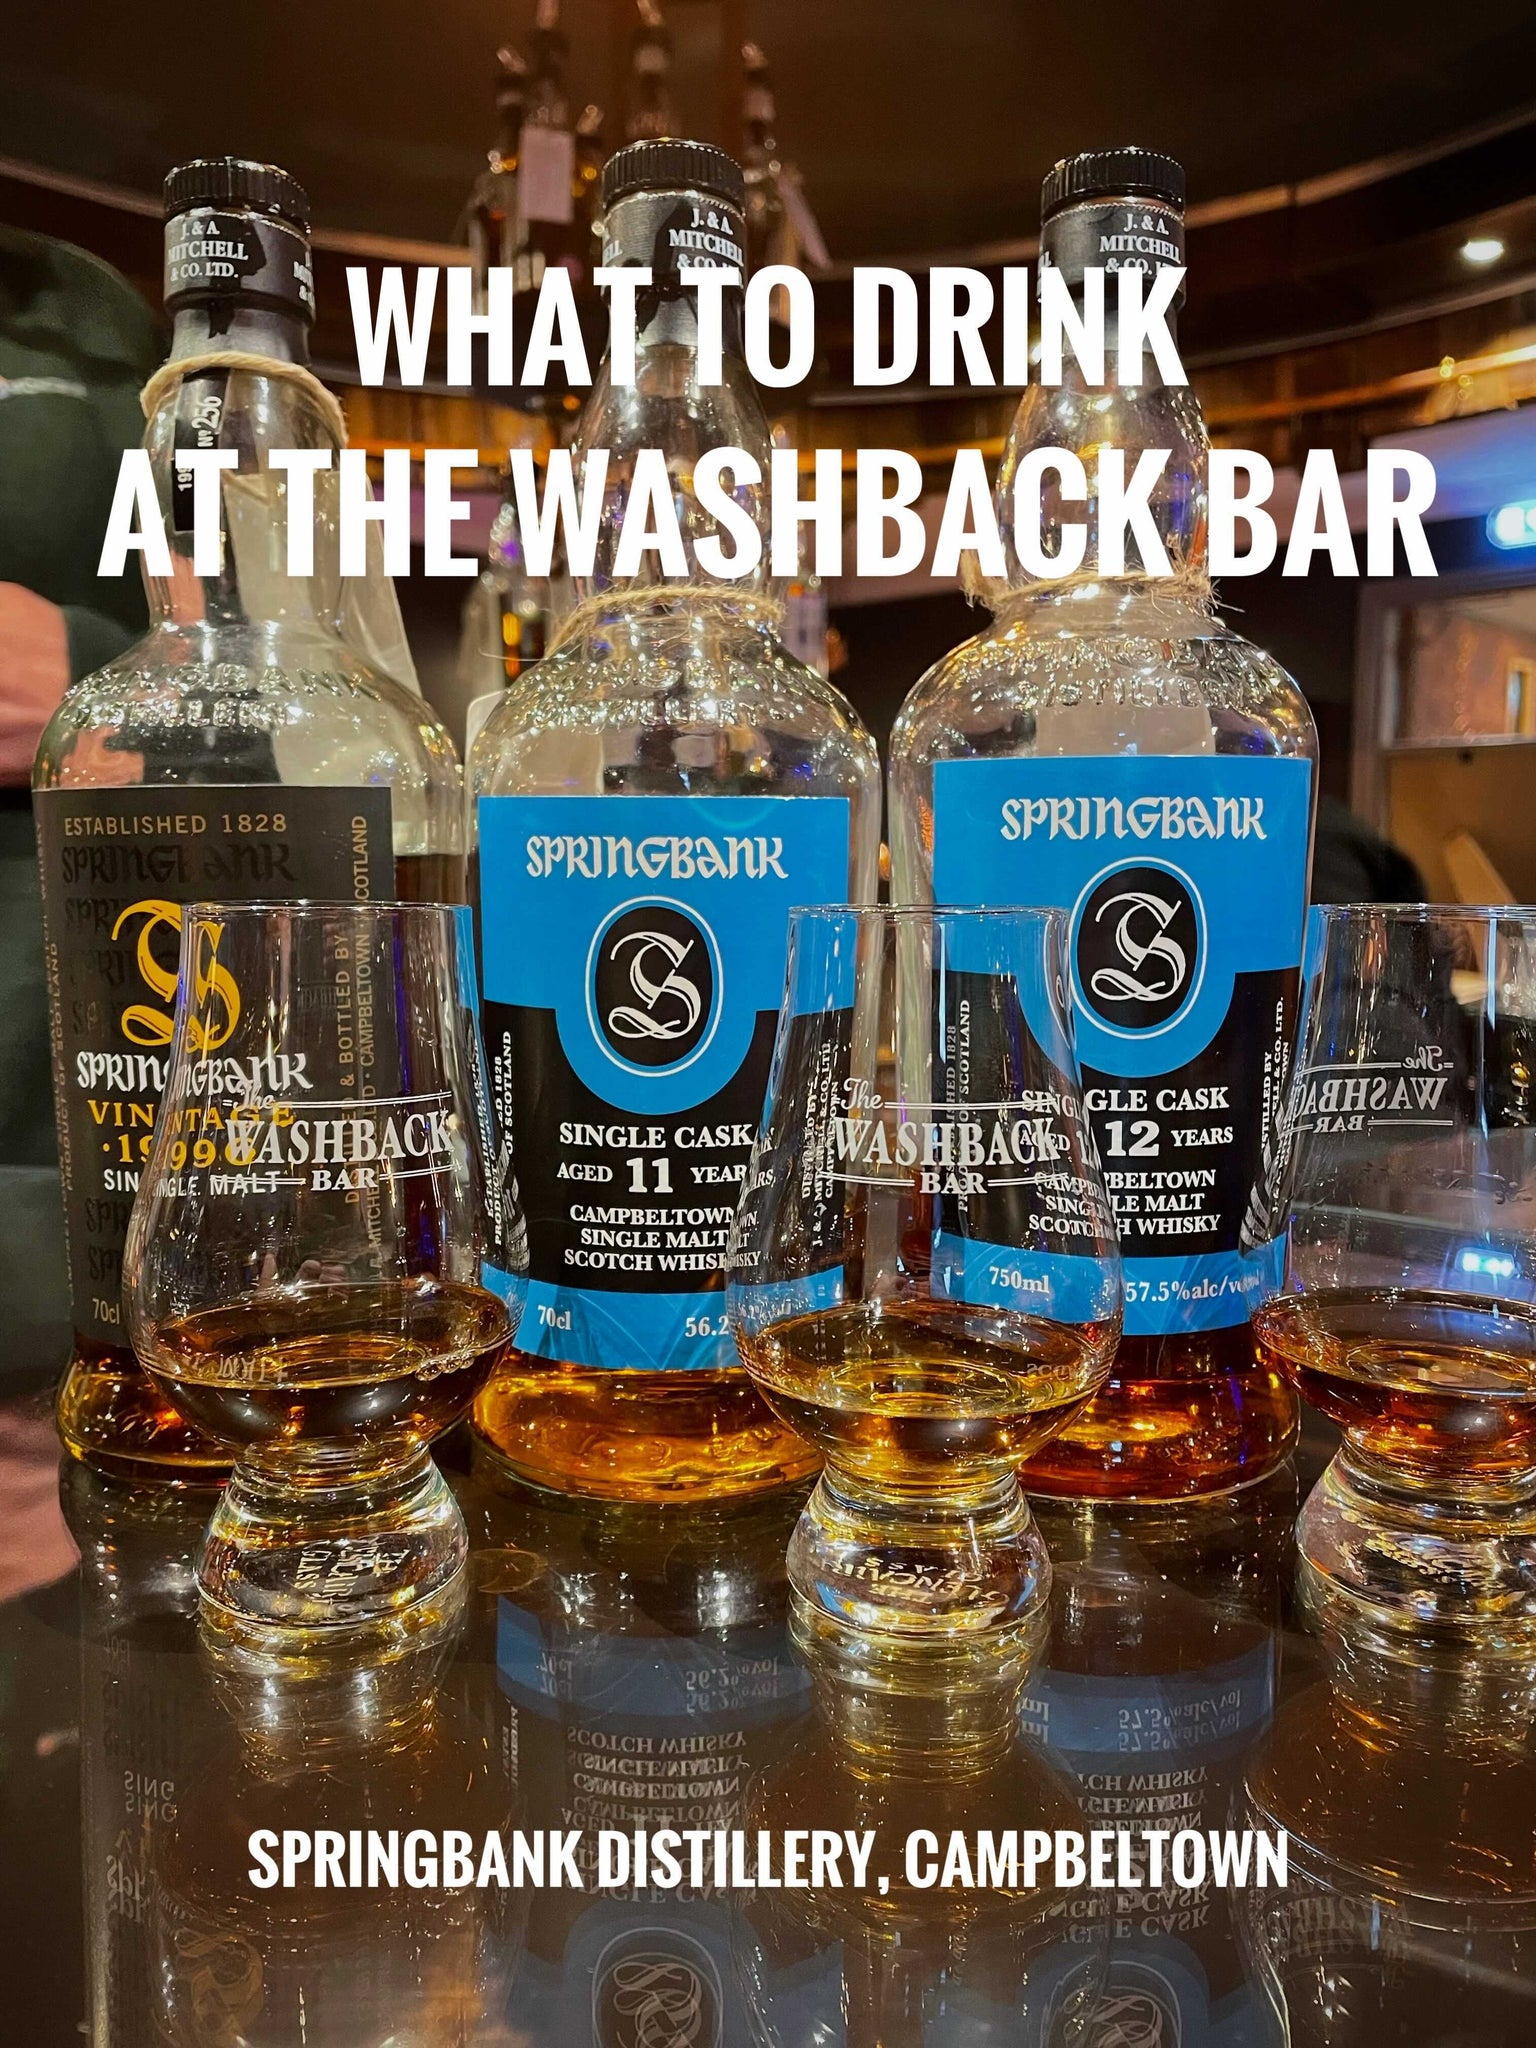 What to drink at the Washback Bar, Springbank Distillery 2022